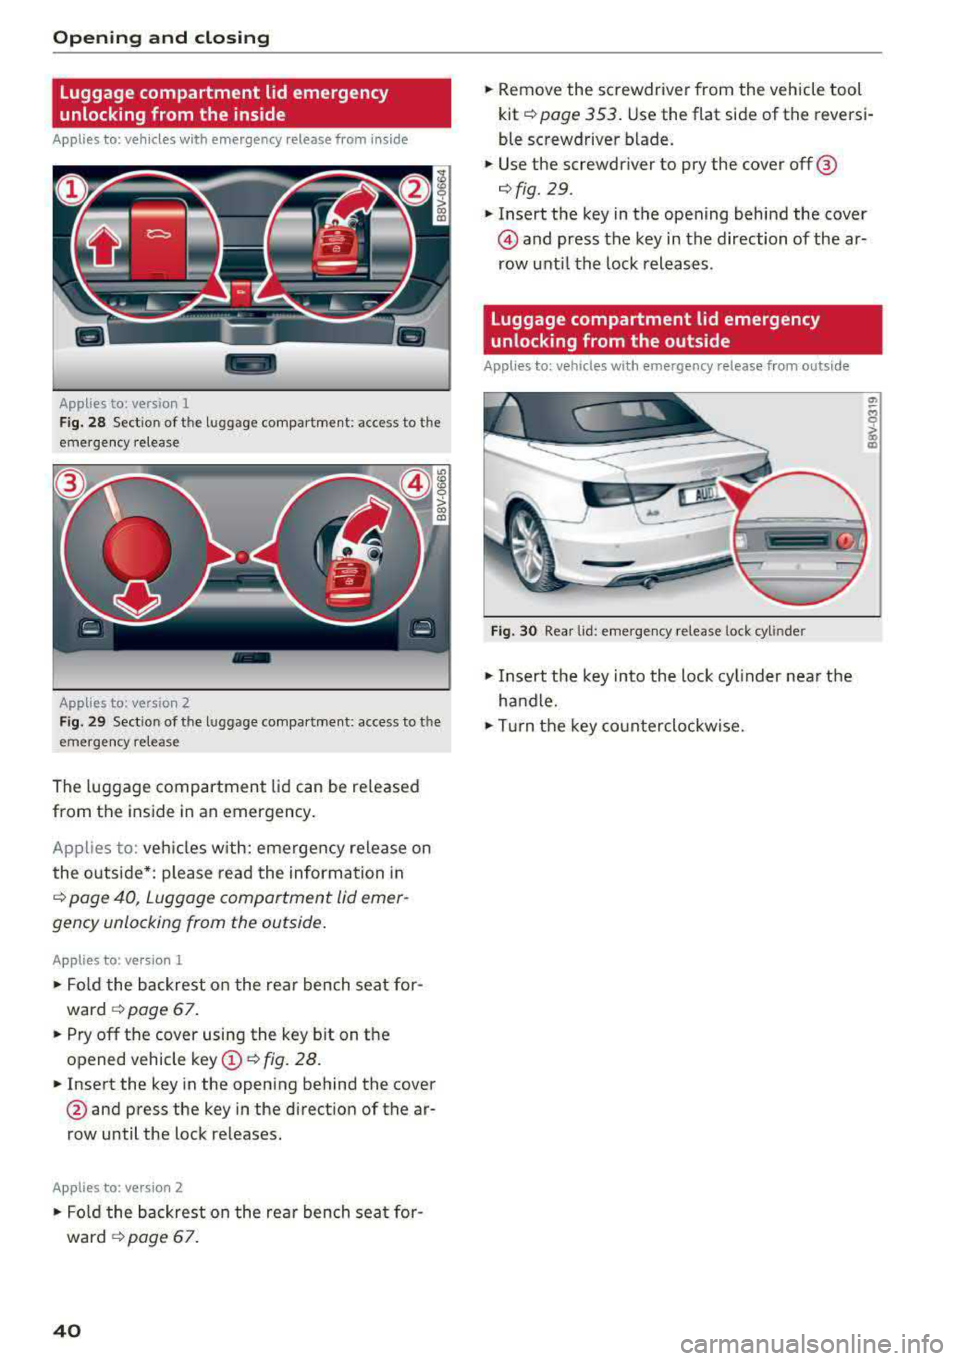 AUDI A3 SEDAN 2017 Service Manual Opening  and closing 
Luggage  compartment  lid  emergency  
unlocking  from  the  inside 
Applies  to: vehicles  with  emergency  release from inside 
-
Applies  to: version  1 
Fig.  28 Sect io n  o